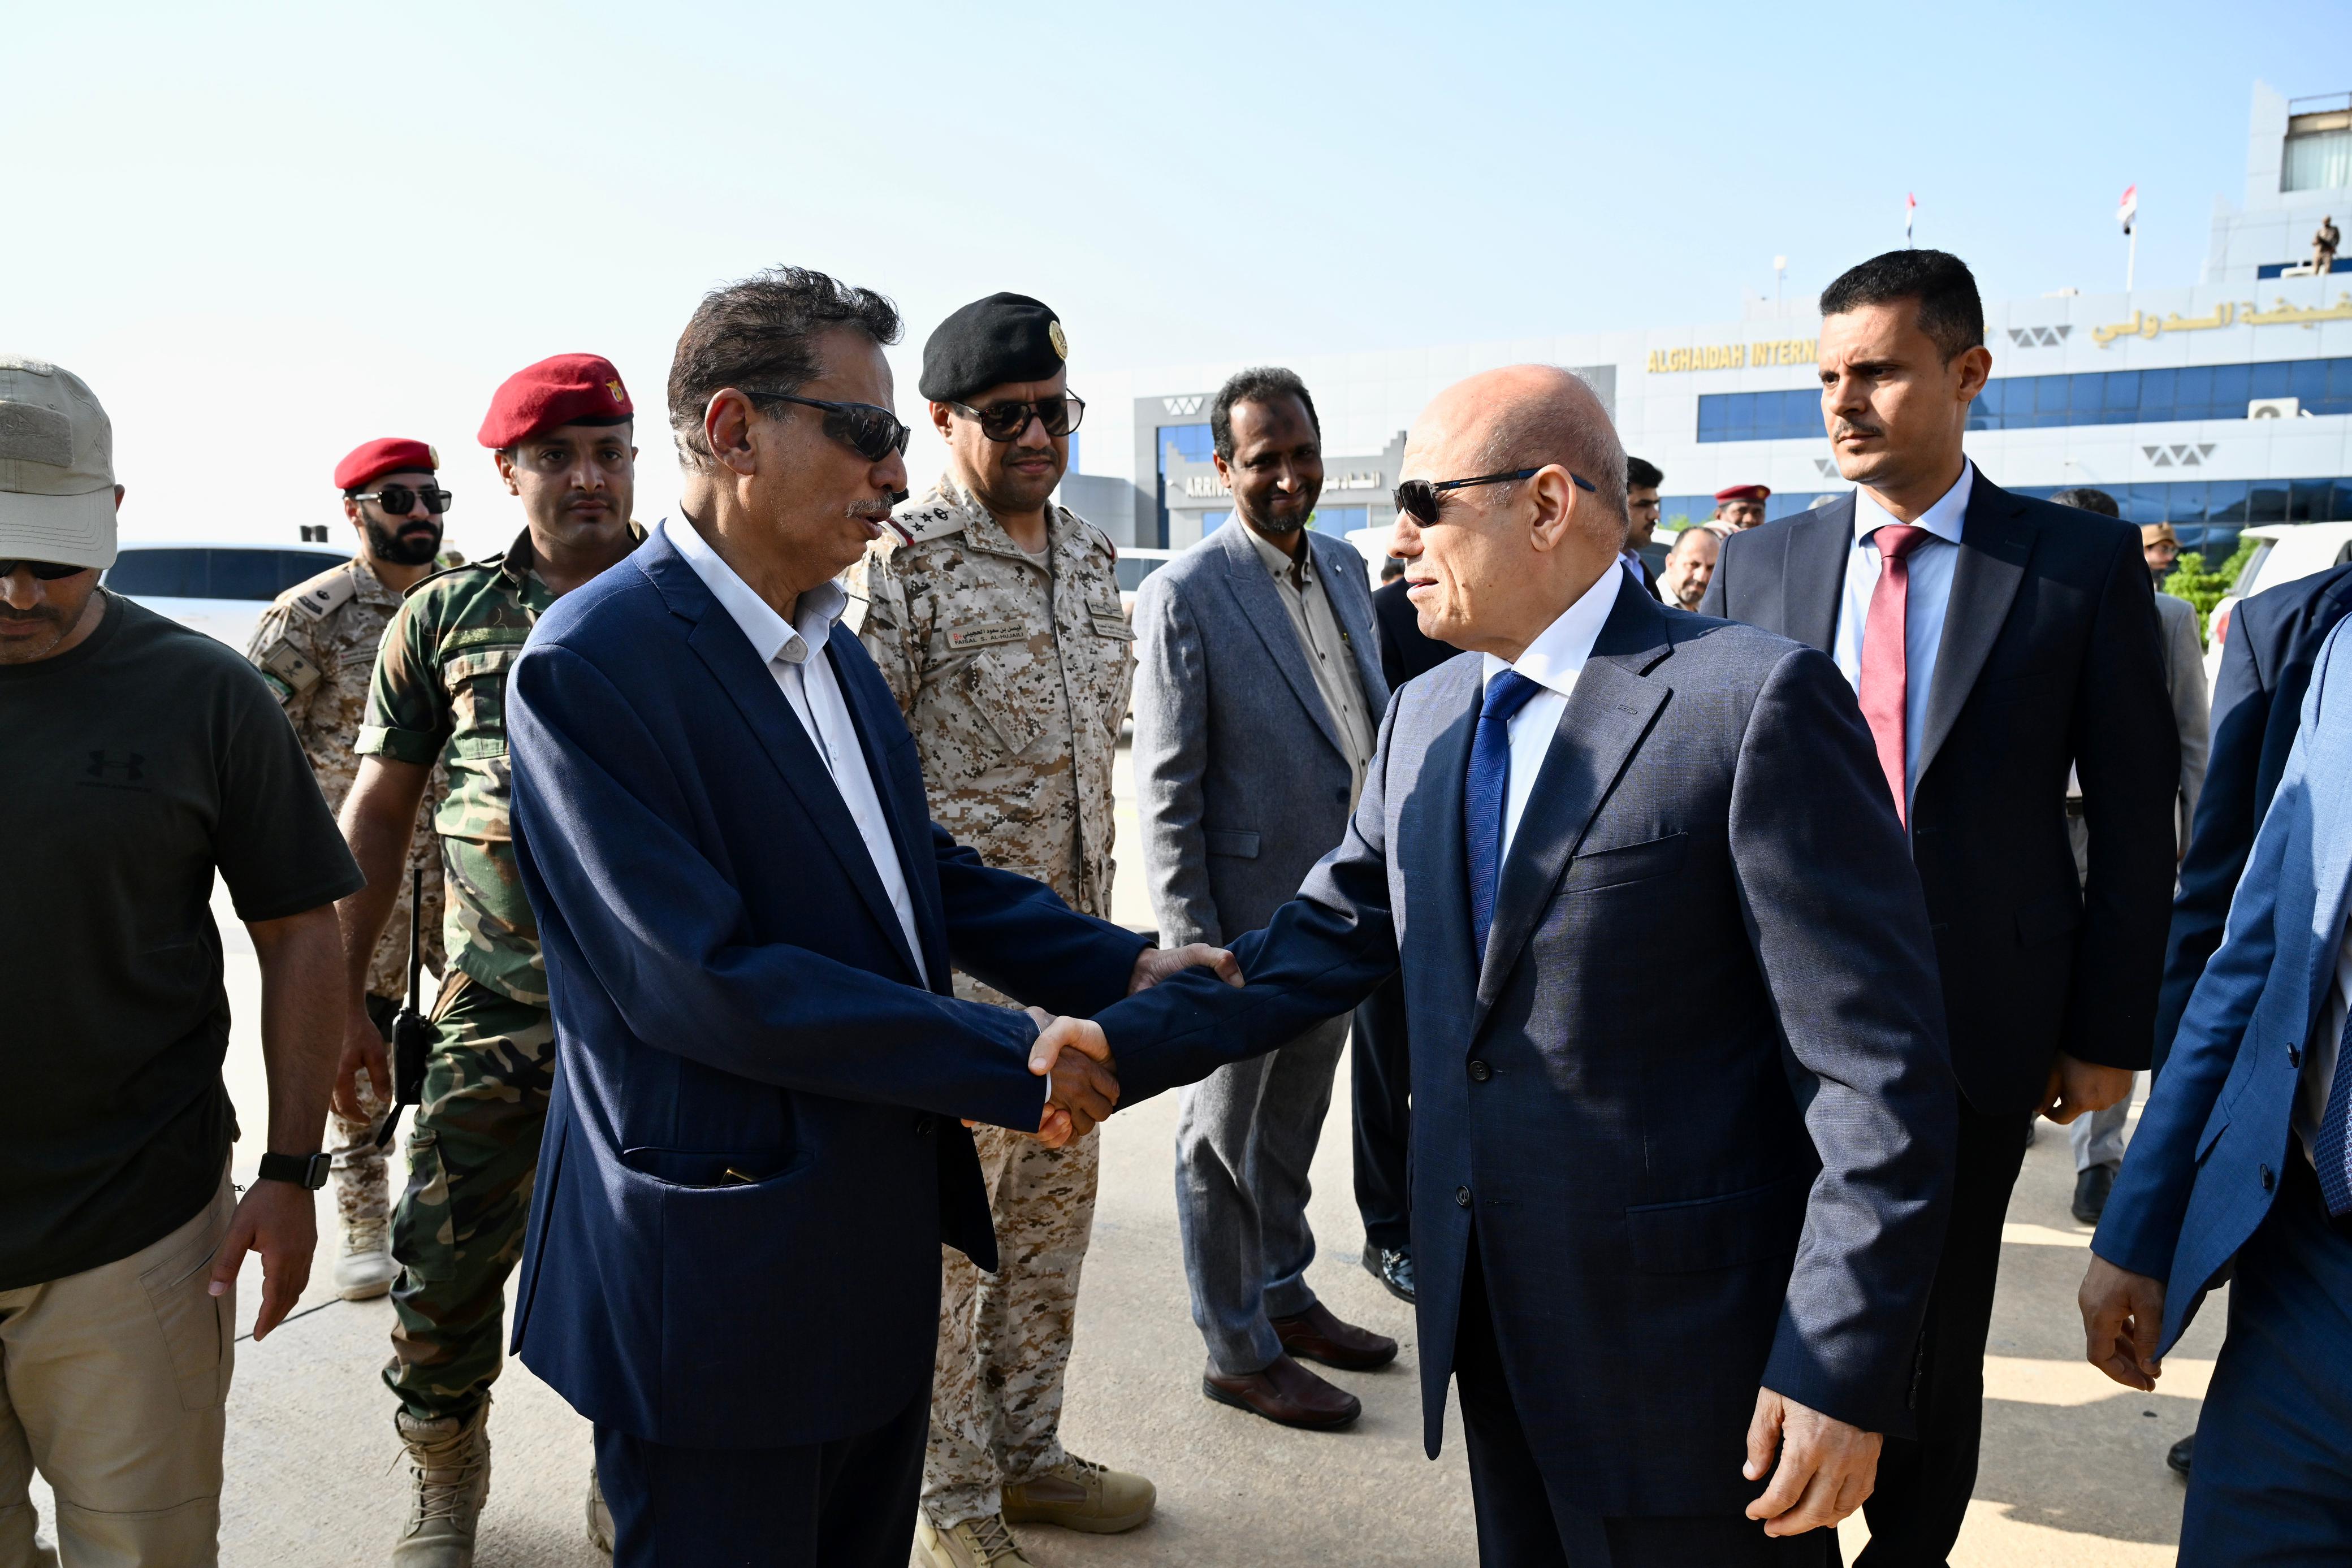 HIS EXCELLENCY THE PRESIDENT LEAVES AL-MAHRAH GOVERNORATE, RETURNING TOTHE CAPITAL, ADEN, October 29, 2023